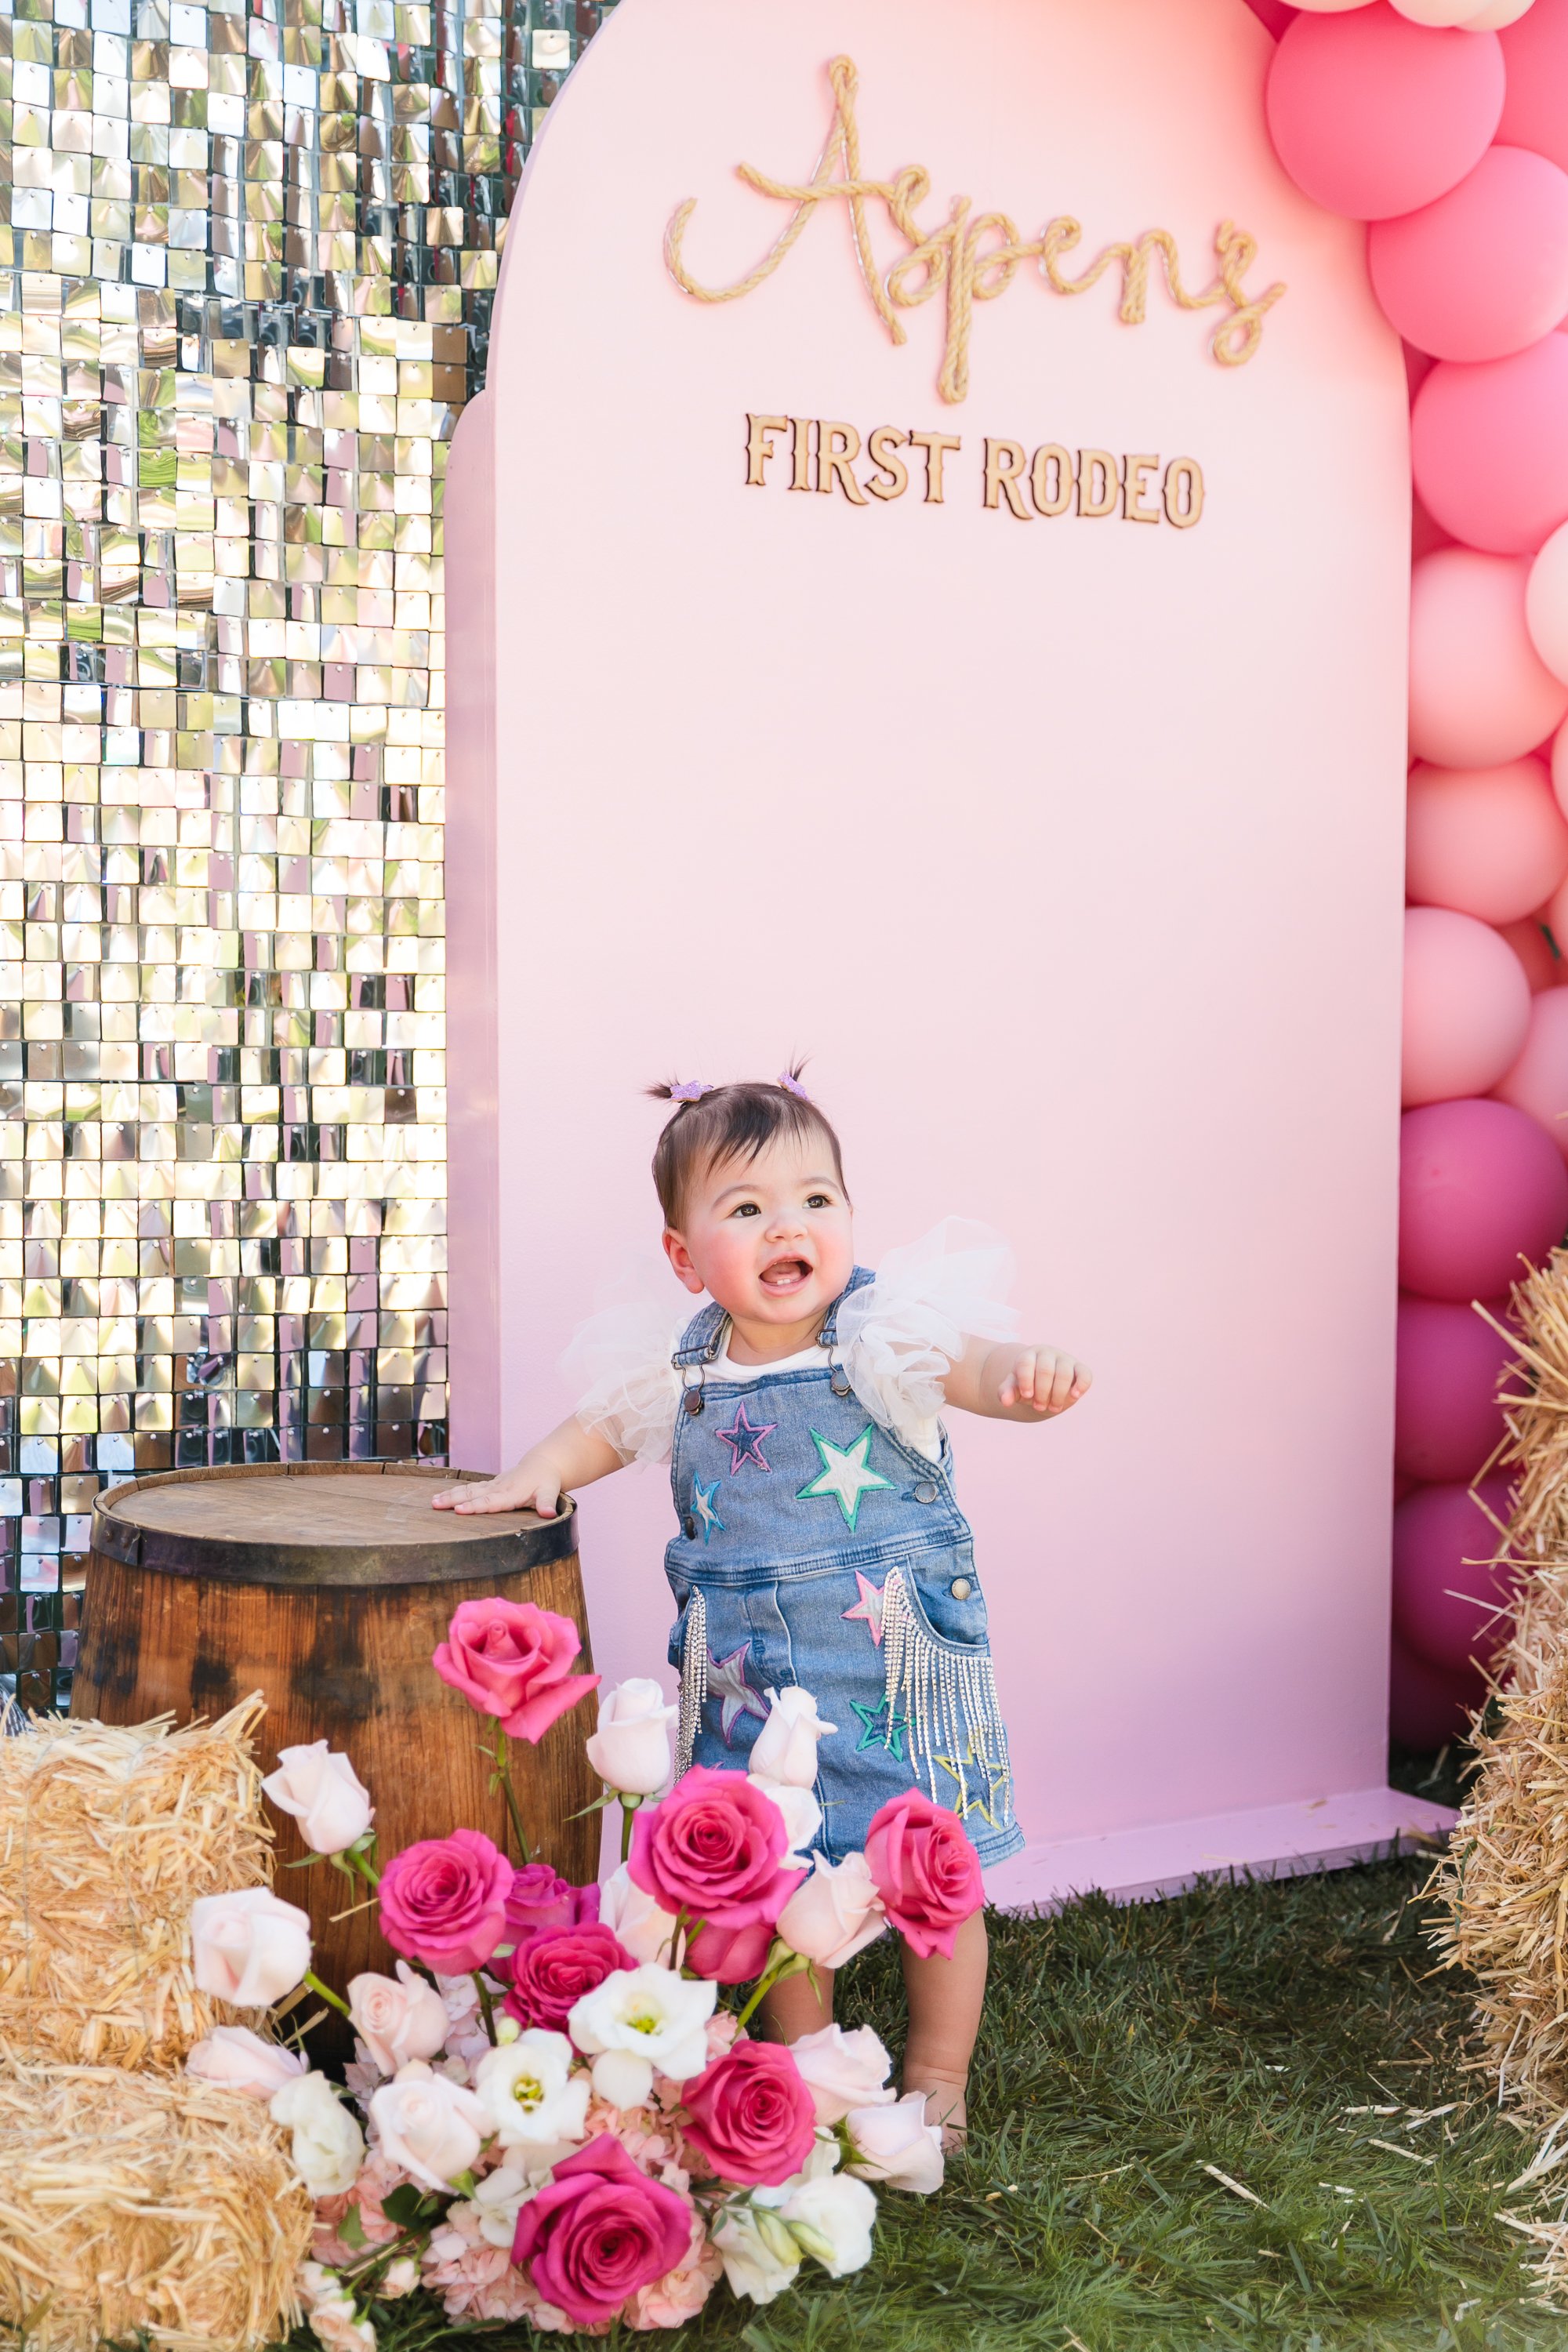 Los_Angeles_Party_Photographer_Luxury_Event_First_Birthday_Baby_Sherwood_Beverly_Hills_Cowboy_Disco_Theme_Girl_Child_Family_Photography-0274.jpg